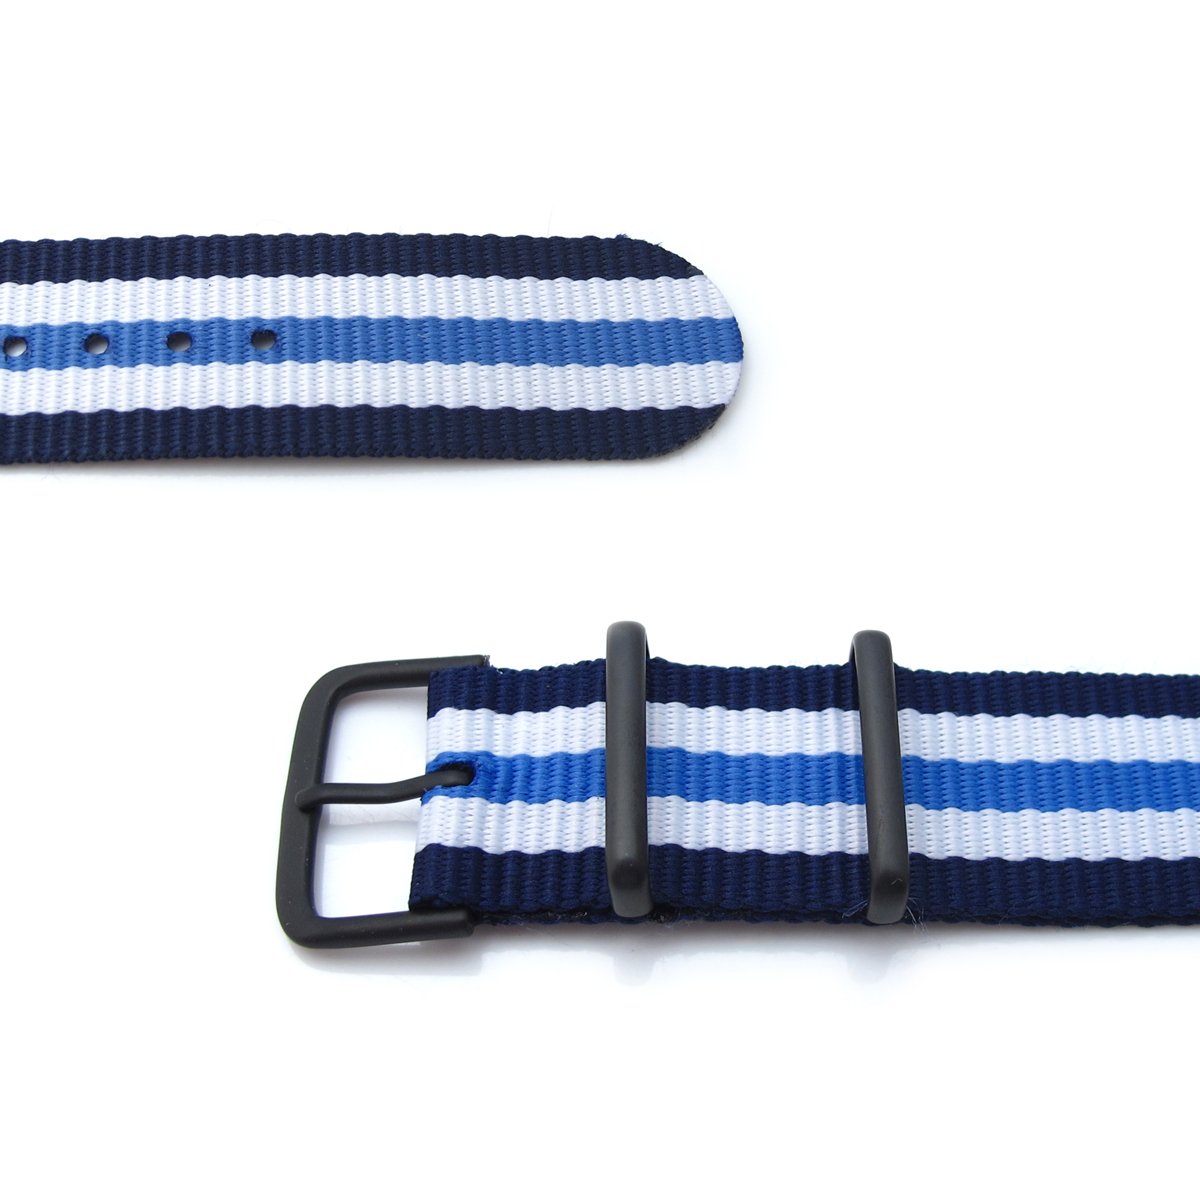 MiLTAT 20mm G10 military watch strap ballistic nylon armband PVD Blue & White Stripes Strapcode Watch Bands